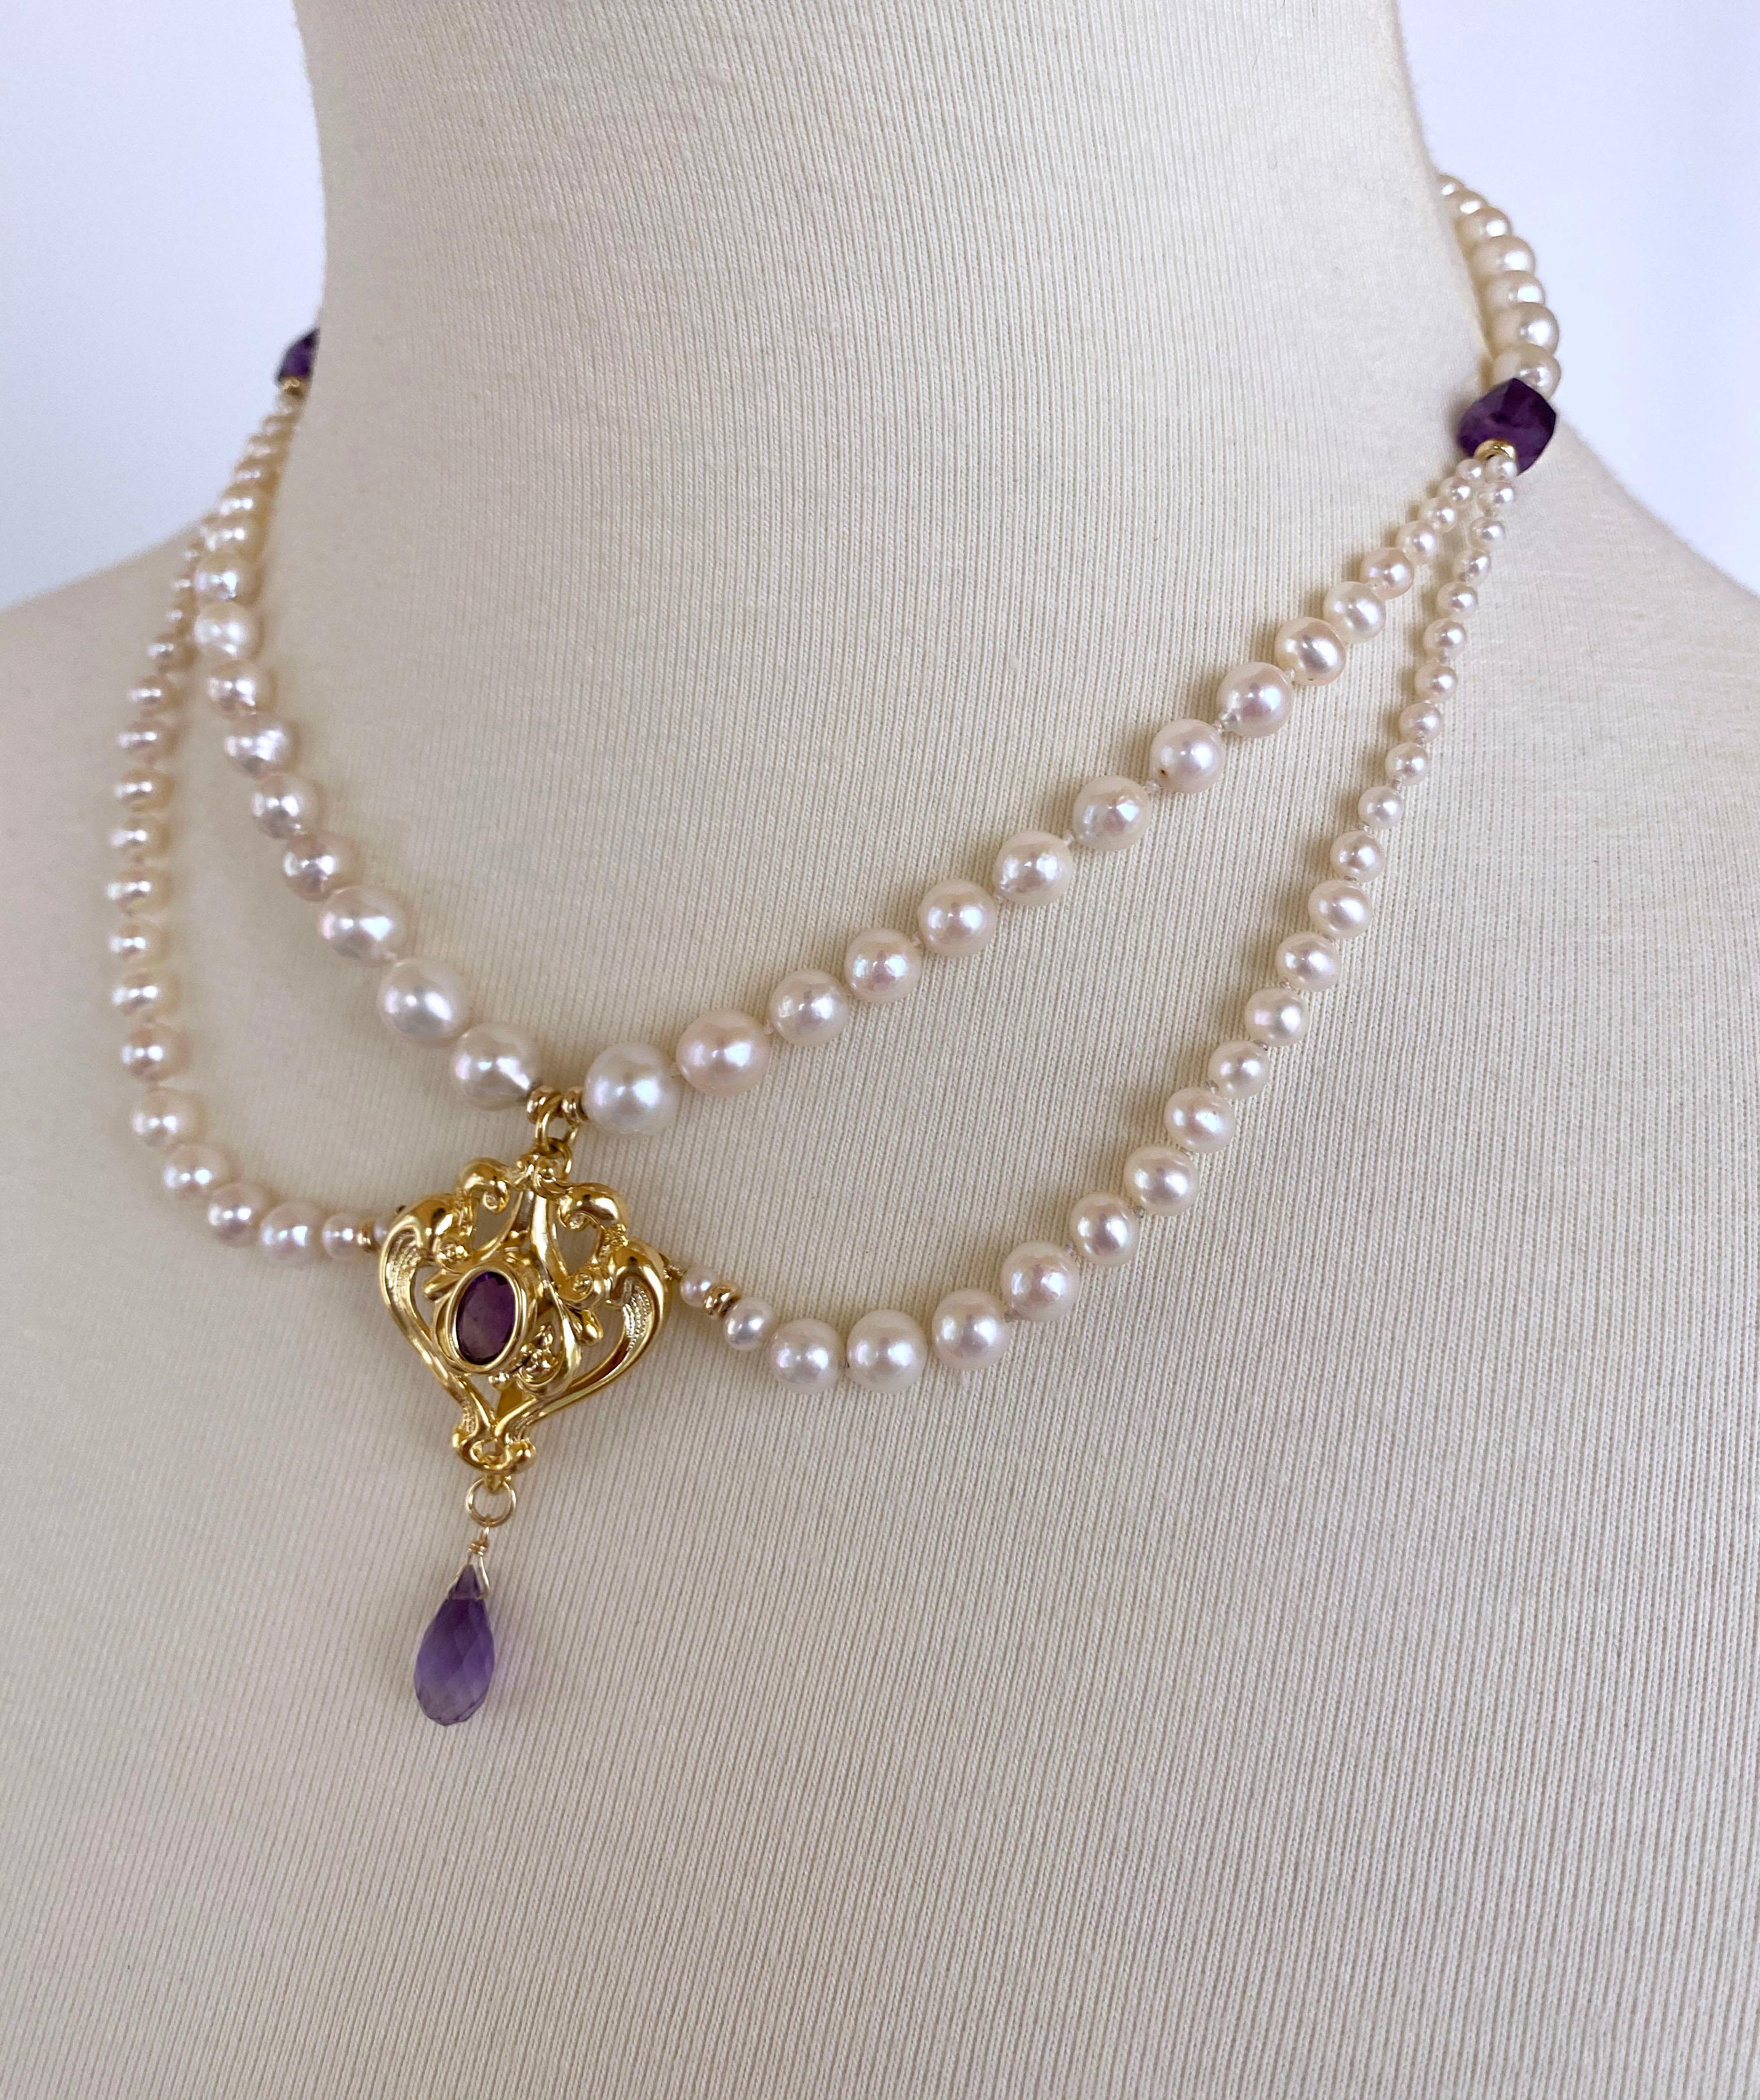 Women's Marina J. Graduated Pearl and Amethyst Necklace with 14K Yellow Gold